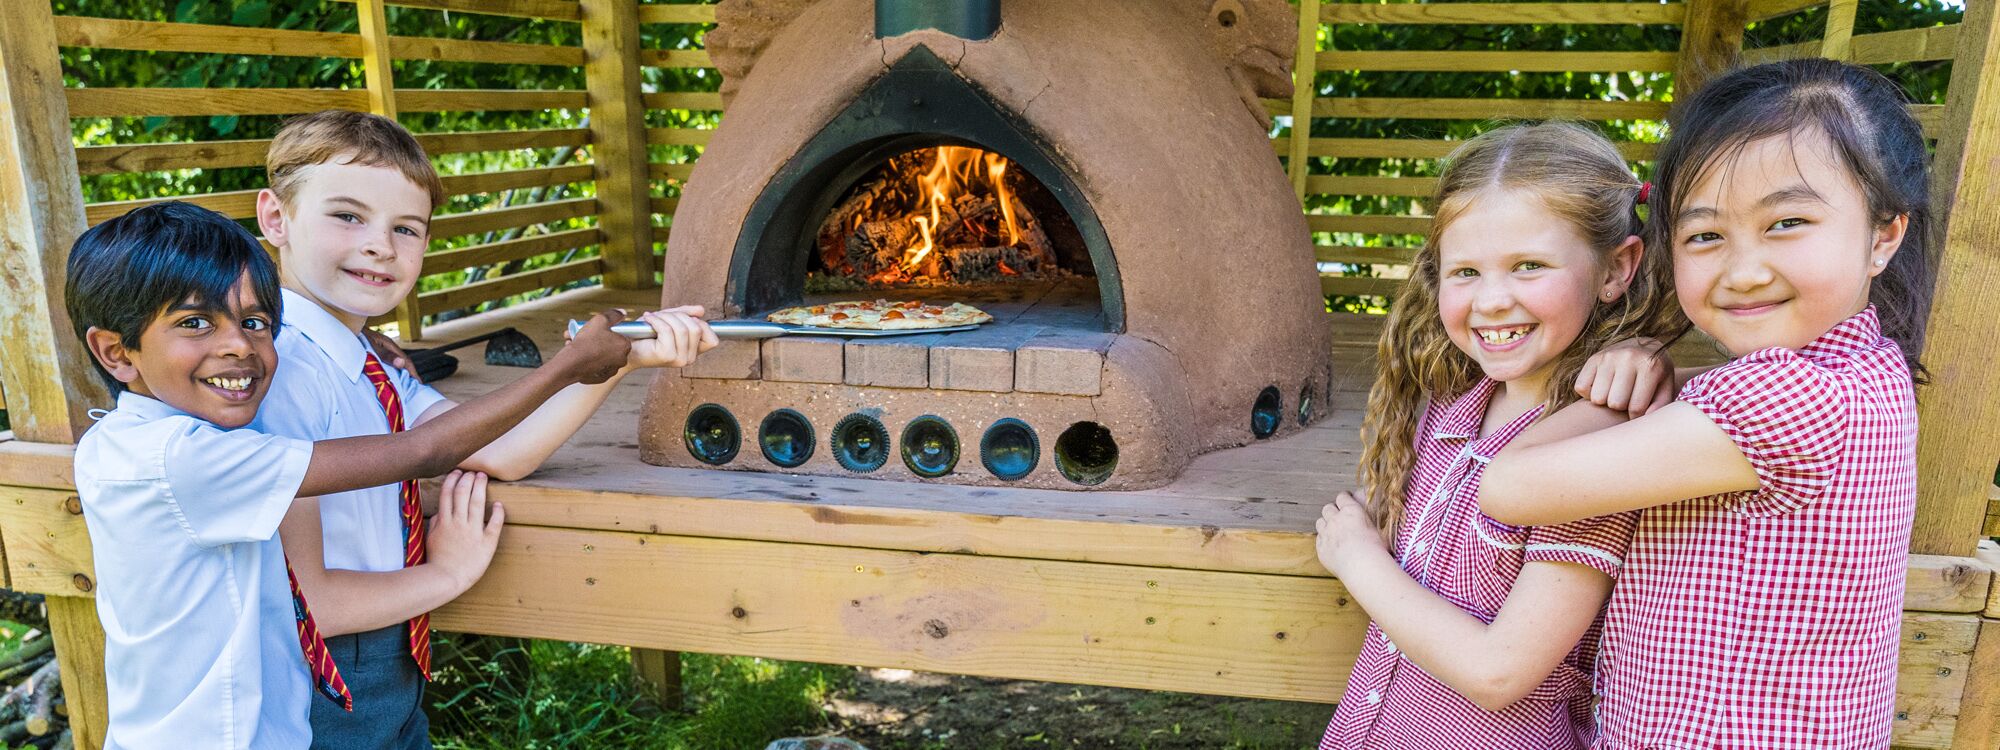 1 pizza oven